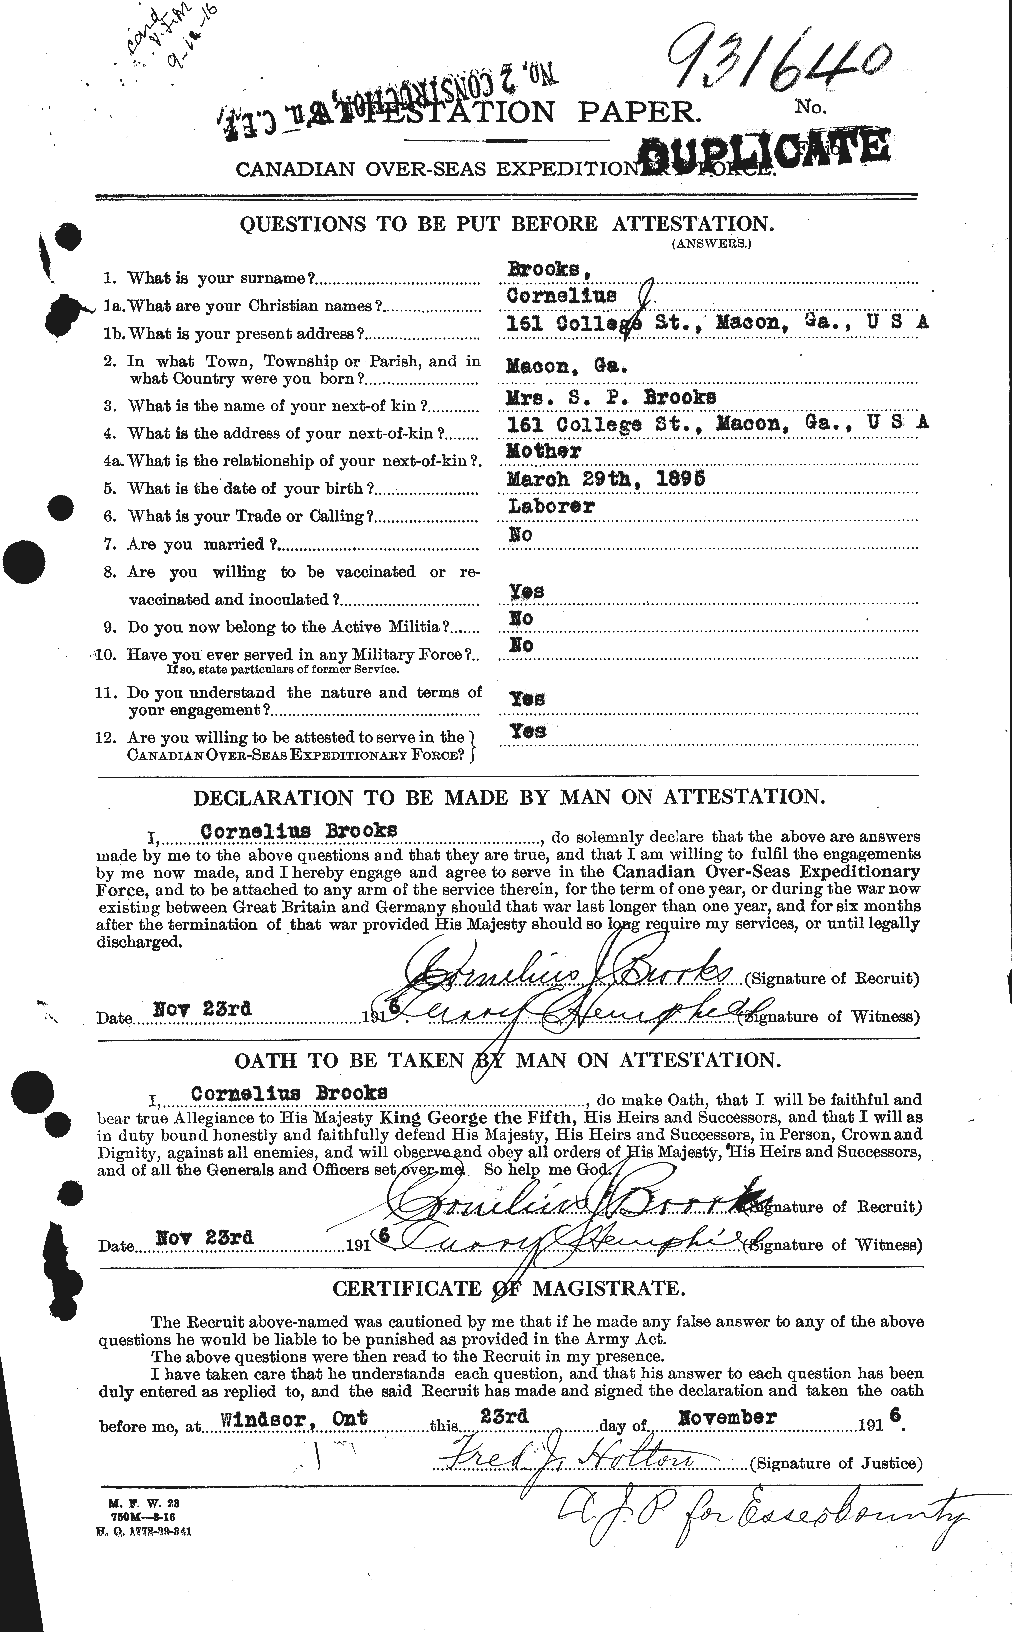 Personnel Records of the First World War - CEF 261548a